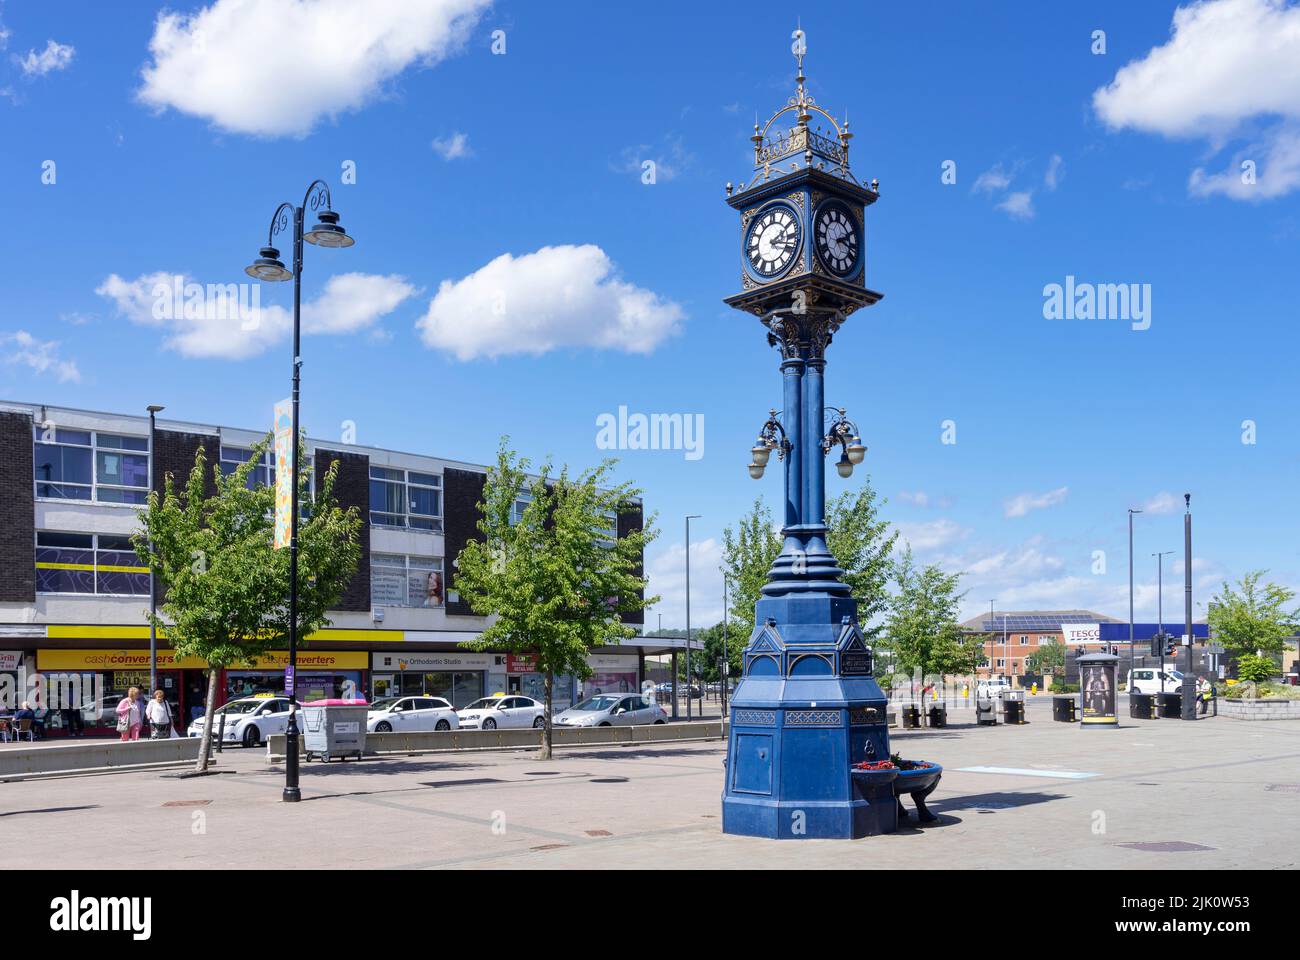 The Hastings Clock, une horloge en fonte à Effingham Square Rotherham Town Center Rotherham South Yorkshire Angleterre GB Europe Banque D'Images